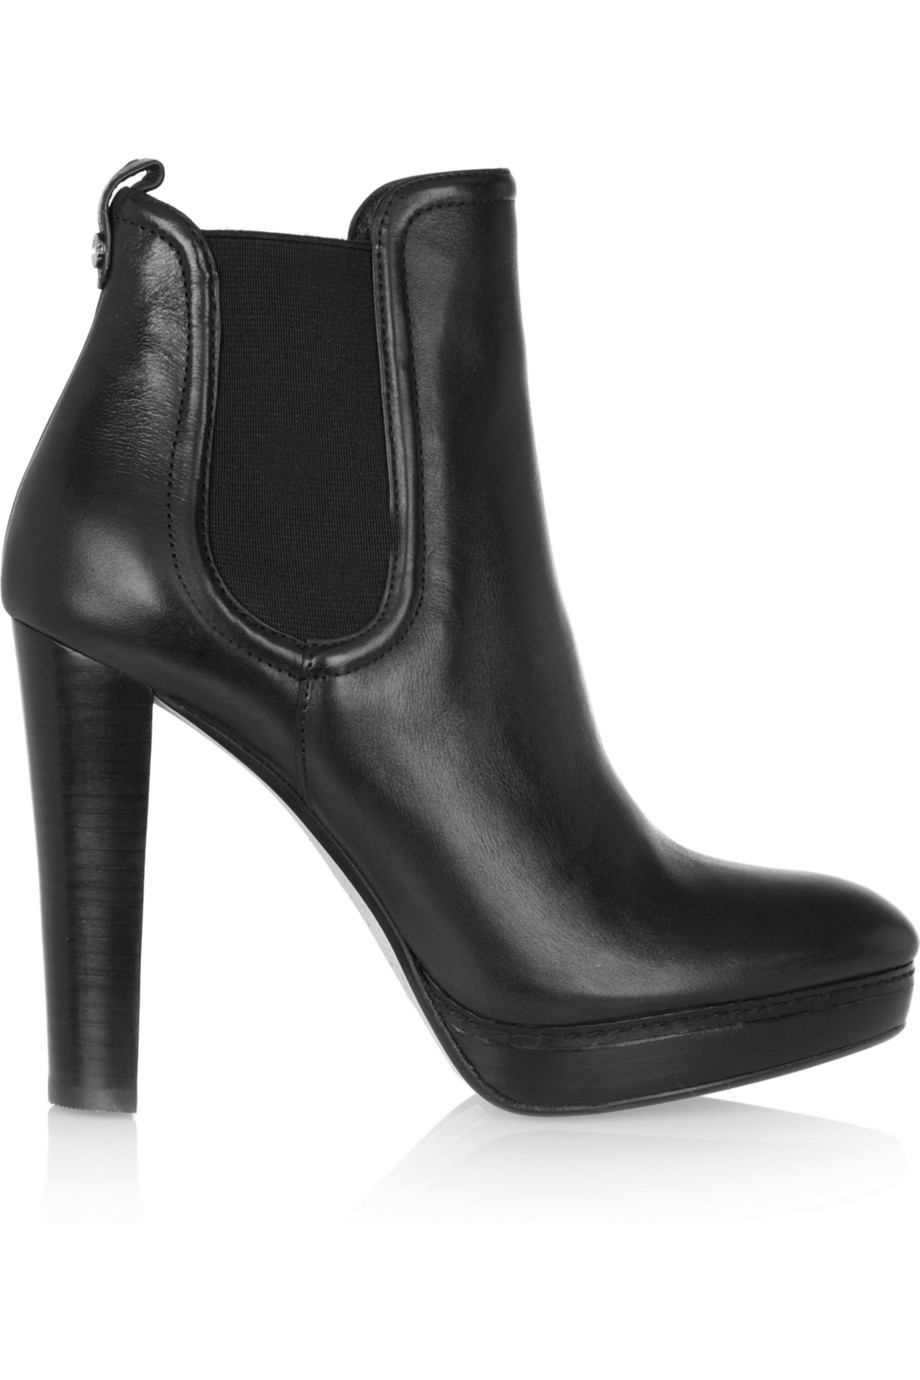 Kors by michael kors Egan Elasticated Leather Ankle Boots in Black | Lyst